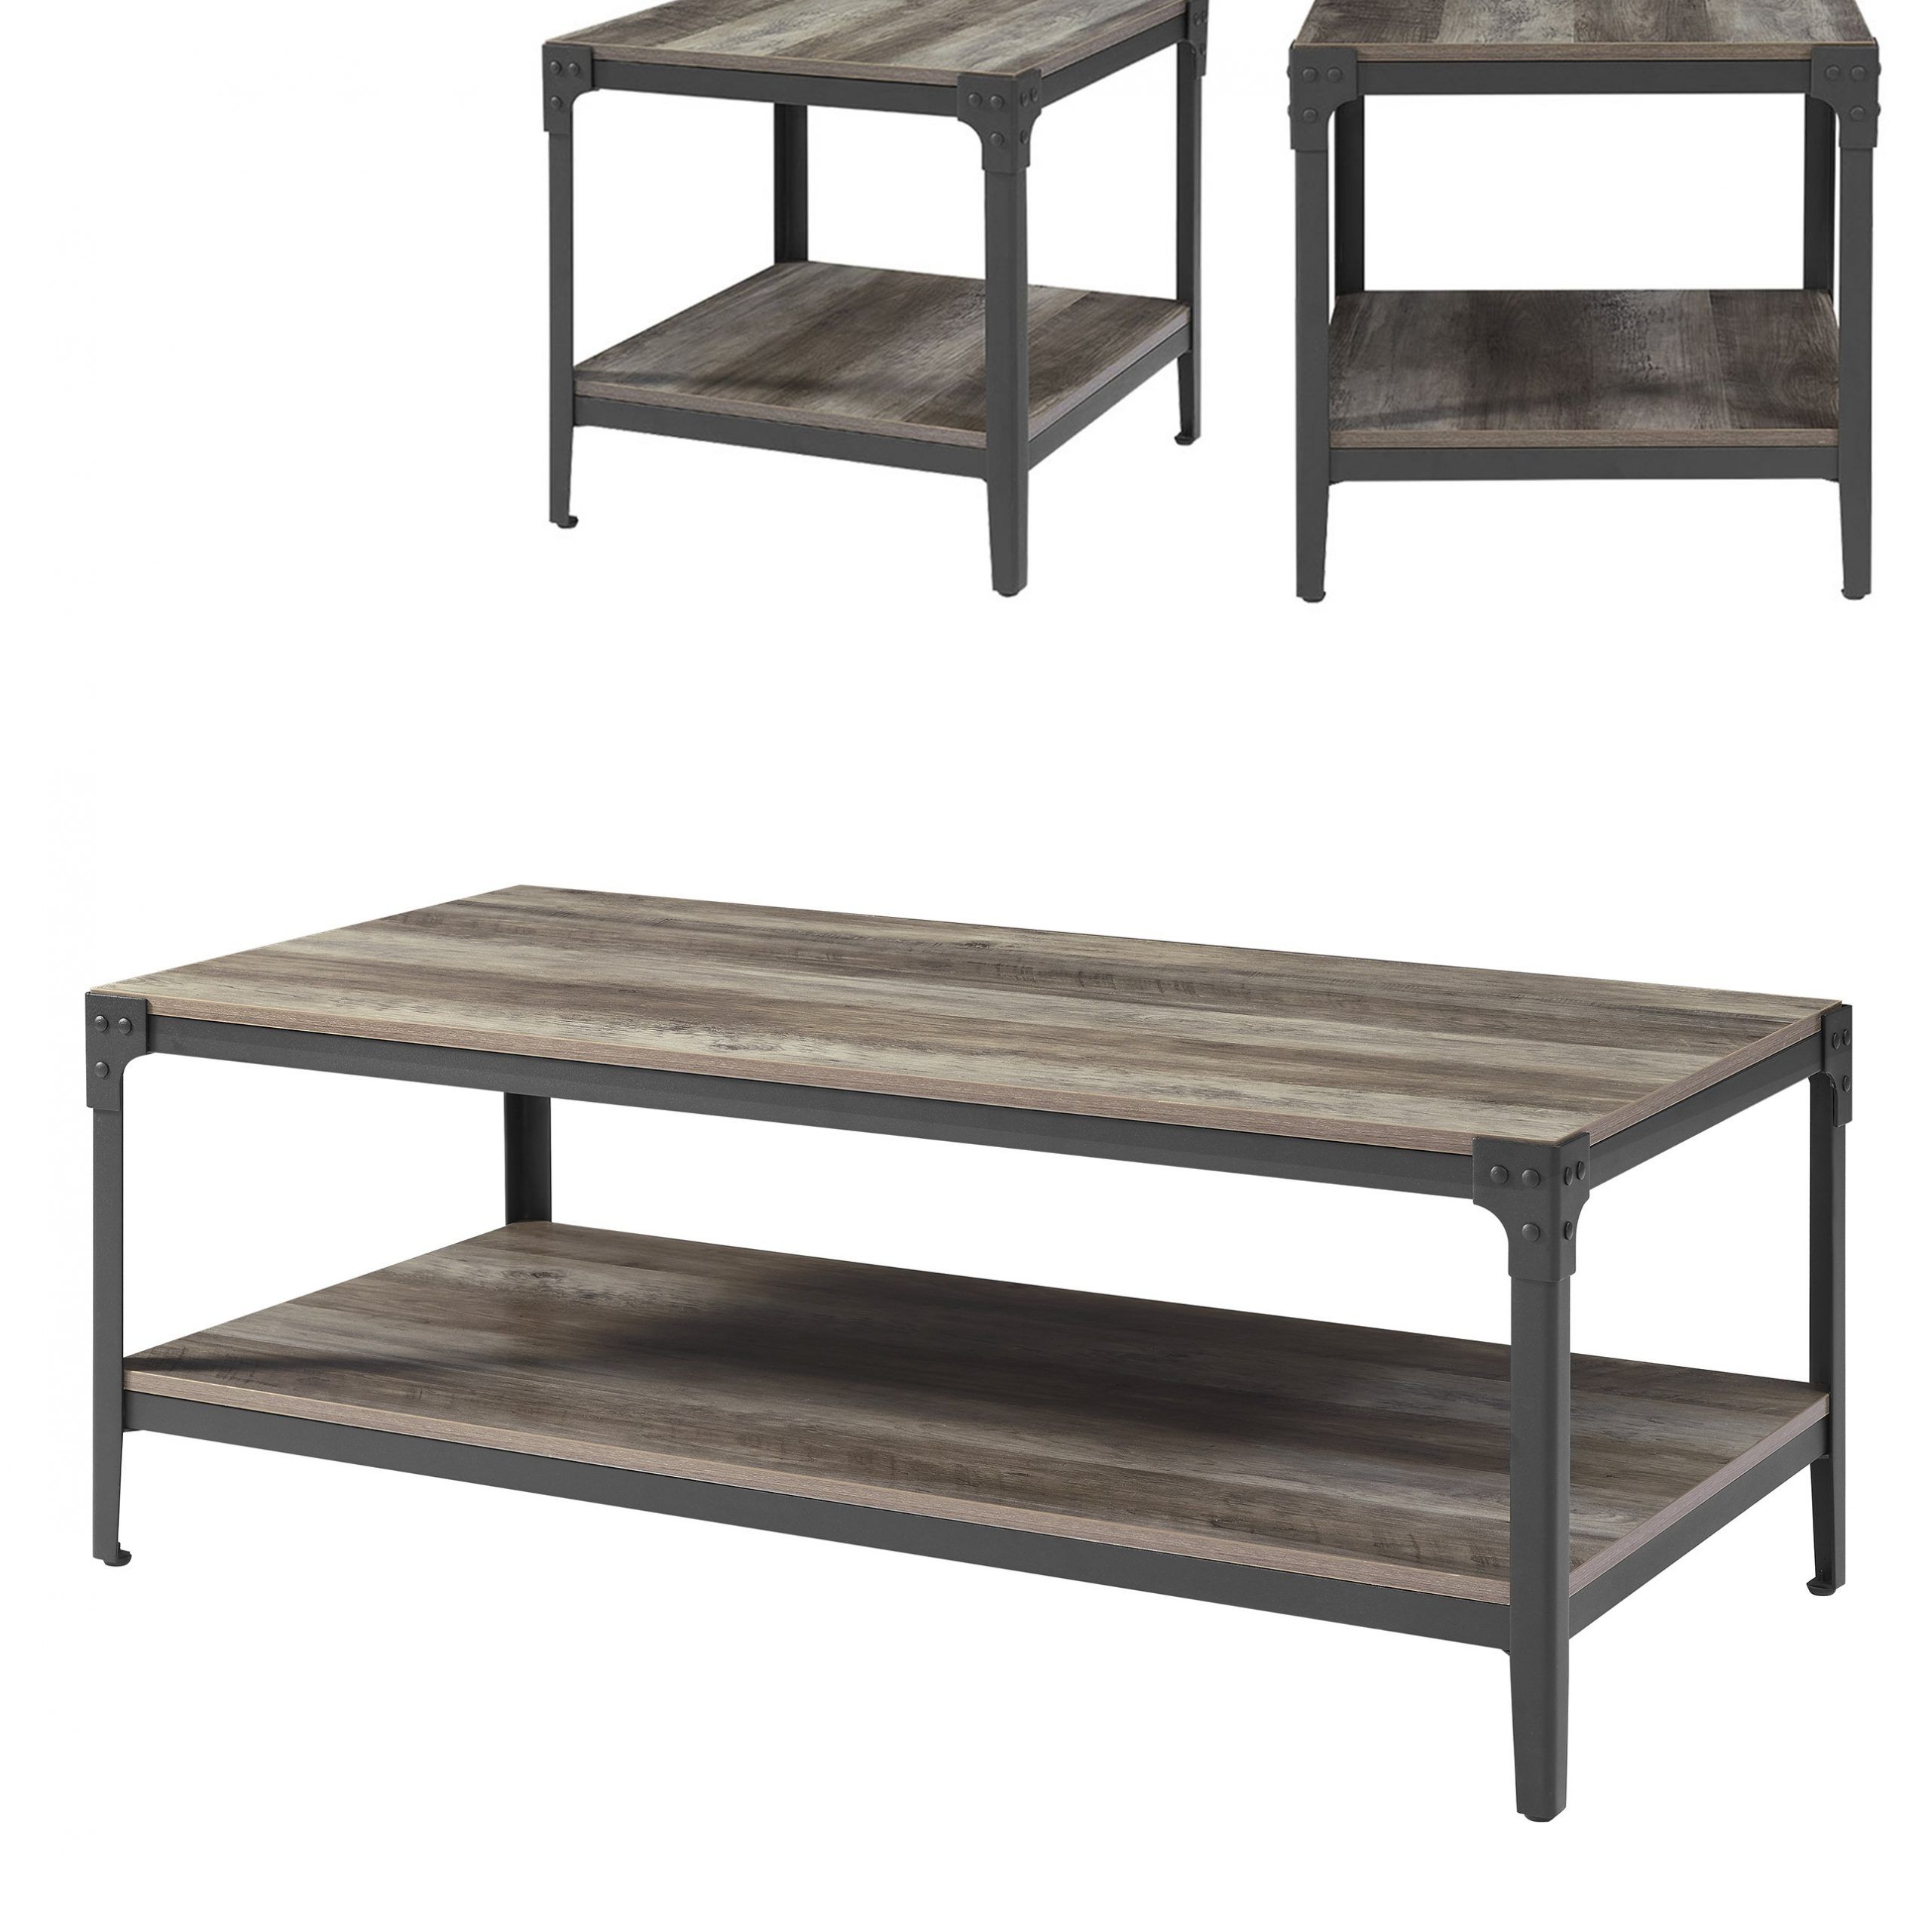 Trendy Manor Park 3 Piece Rustic Coffee Table Set – Grey Wash Intended For Gray Wash Coffee Tables (View 18 of 20)